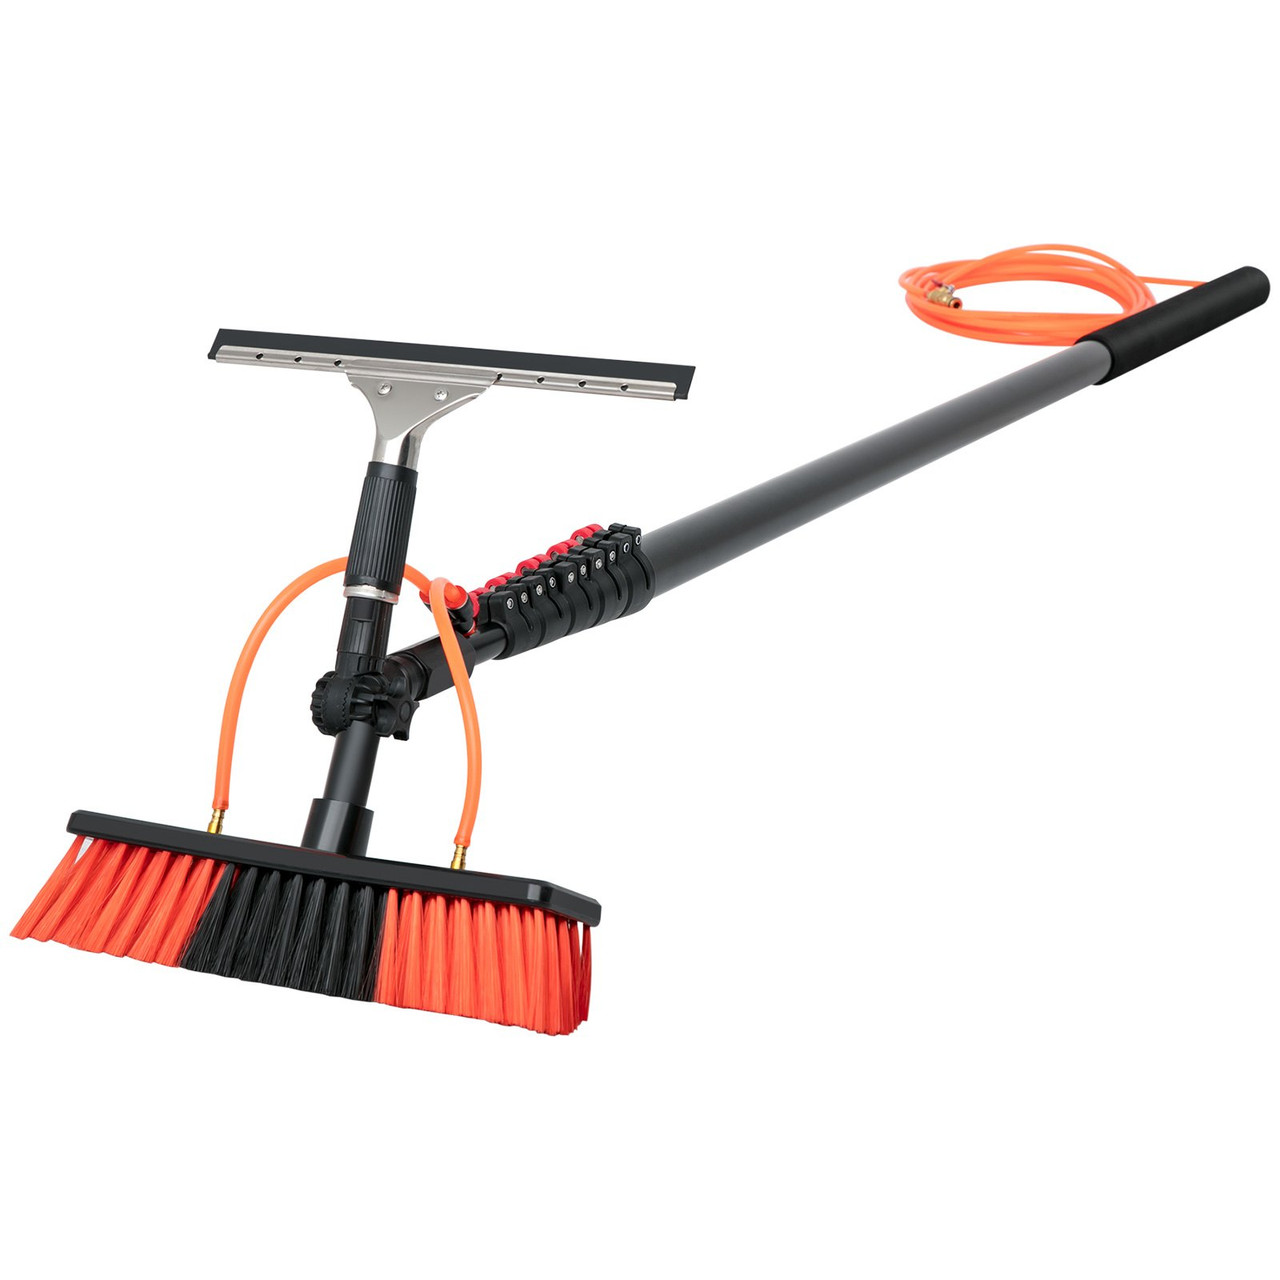 Window Cleaning & Solar Washing Tool - Water Fed Pole Brush (24 Foot Reach)